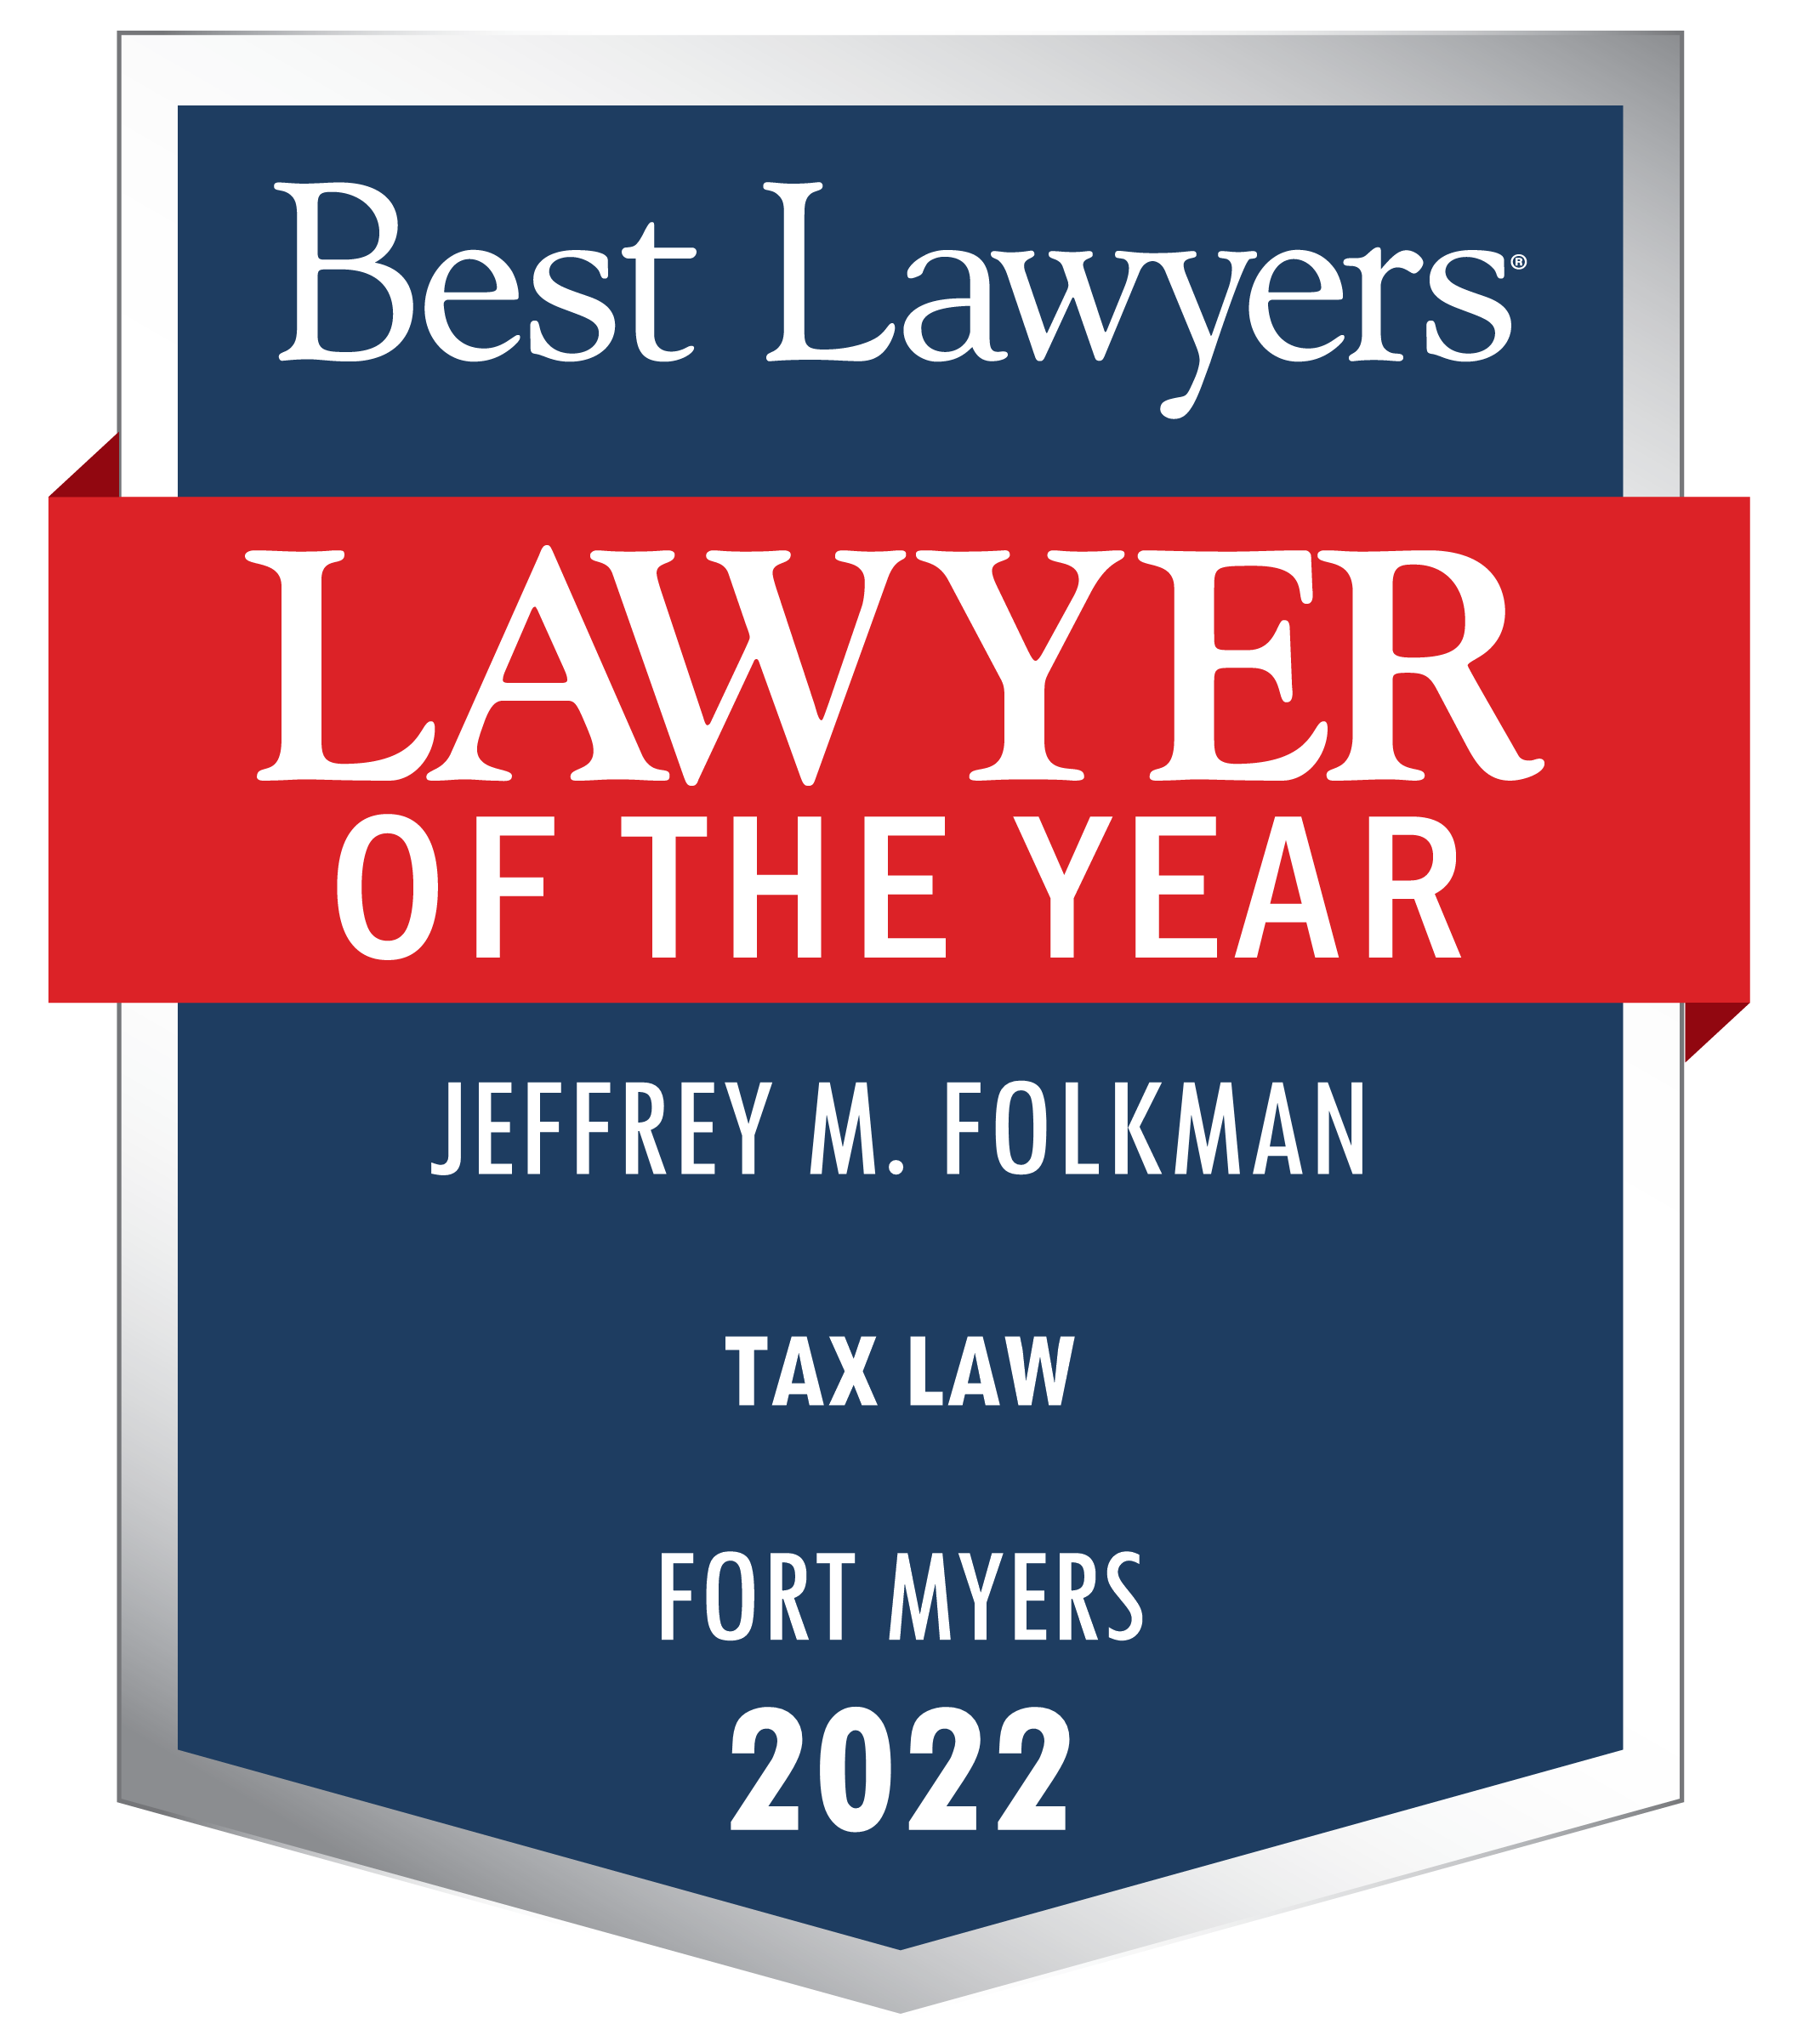 Jeffrey Folkman Best Lawyers lawyer of the year badge for tax law